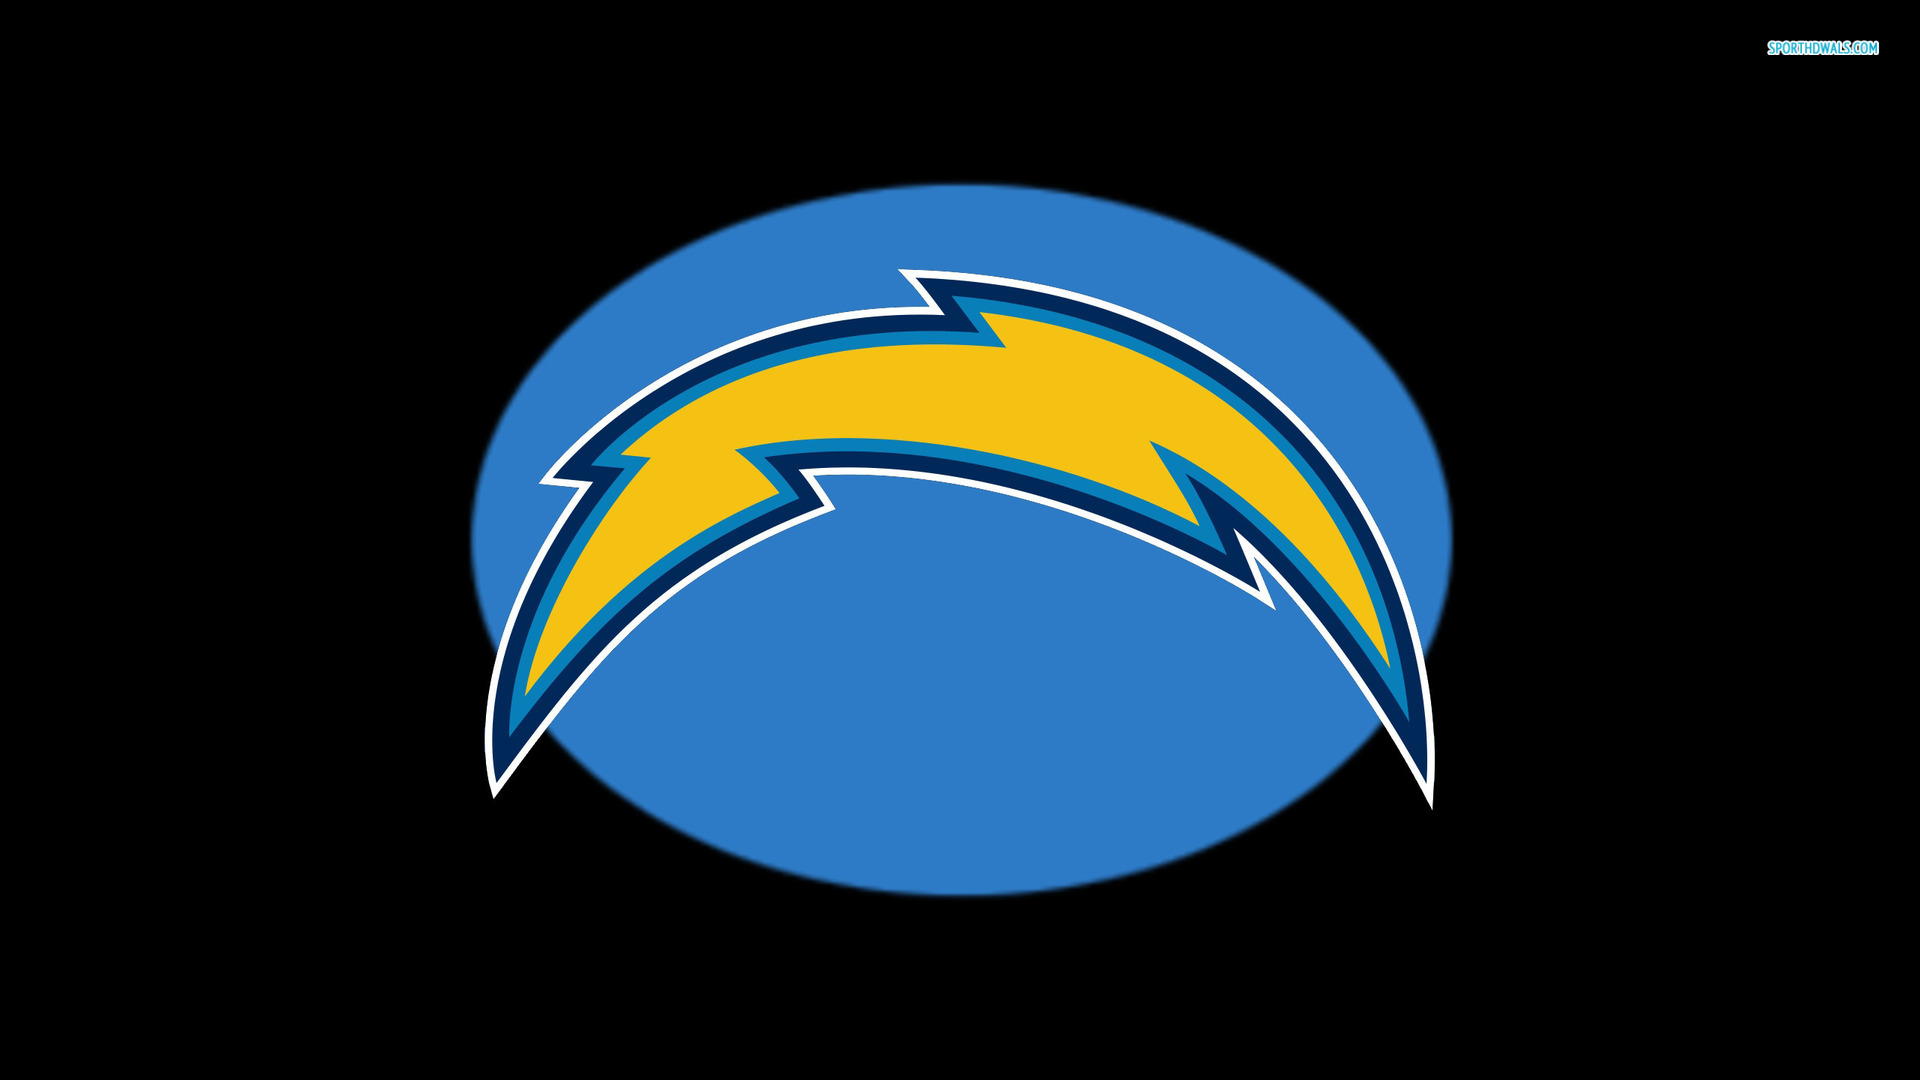 SAN DIEGO CHARGERS nfl football bw wallpaper 1920x1080 158081